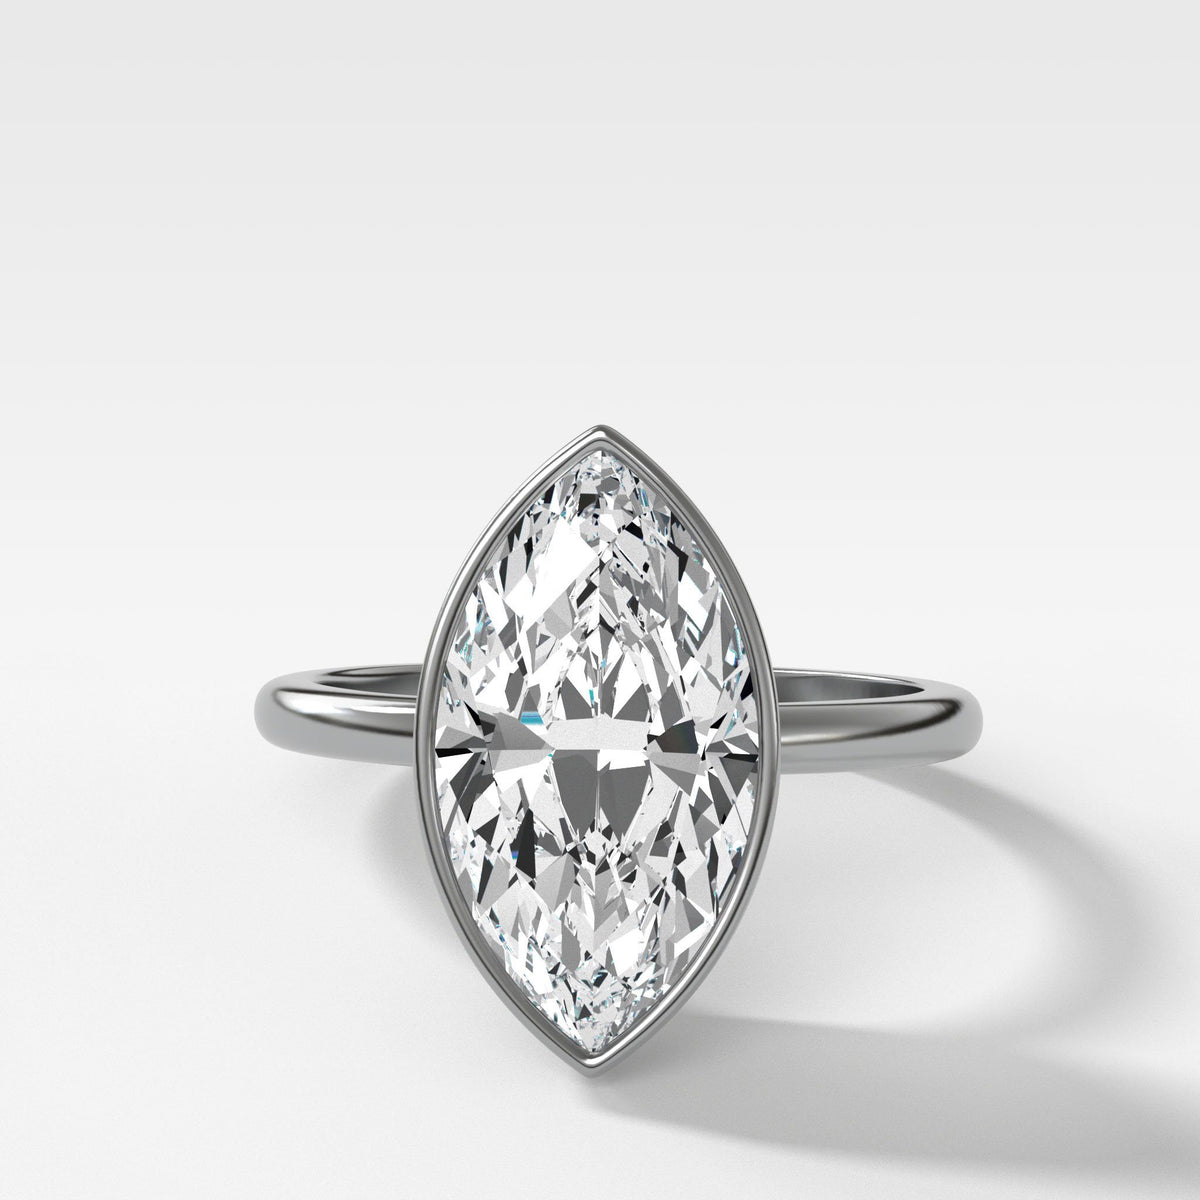 Bezel Penumbra Solitaire by Good Stone in White Gold